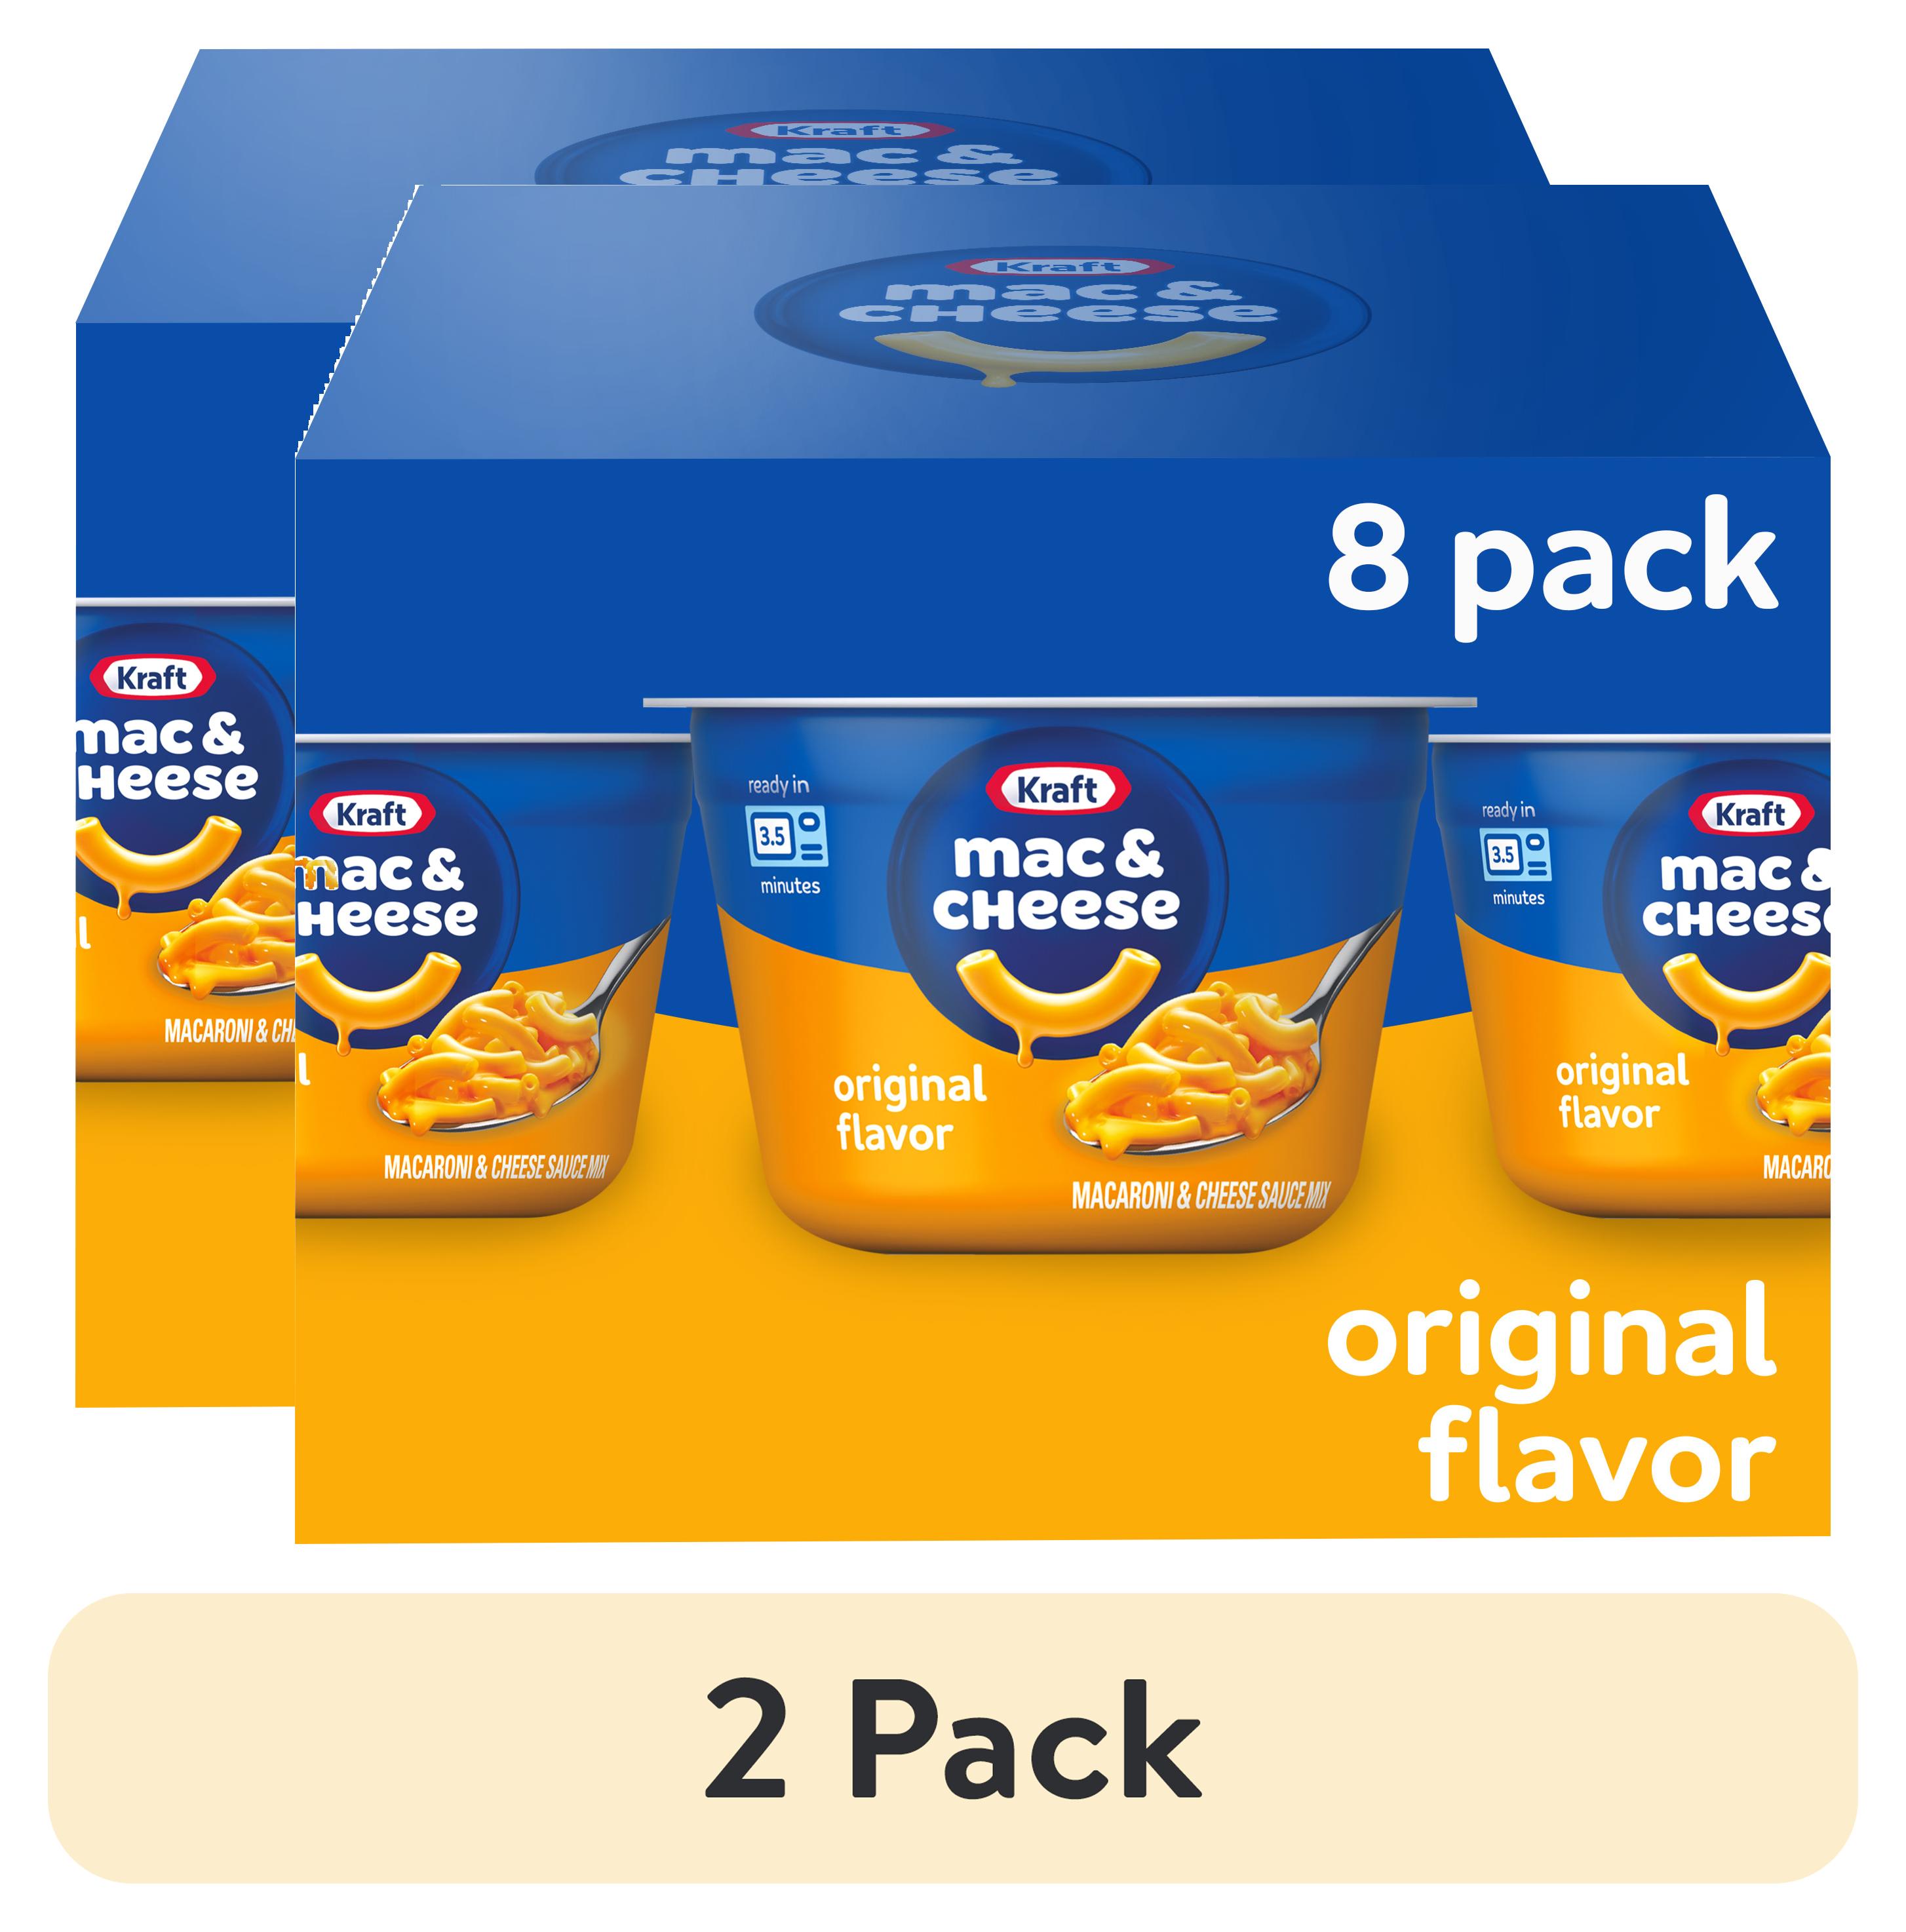 (2 pack) Kraft Original Mac N Cheese Macaroni and Cheese Cups Easy Microwavable Dinner, 8 ct Box, 2.05 oz Cups - image 1 of 21